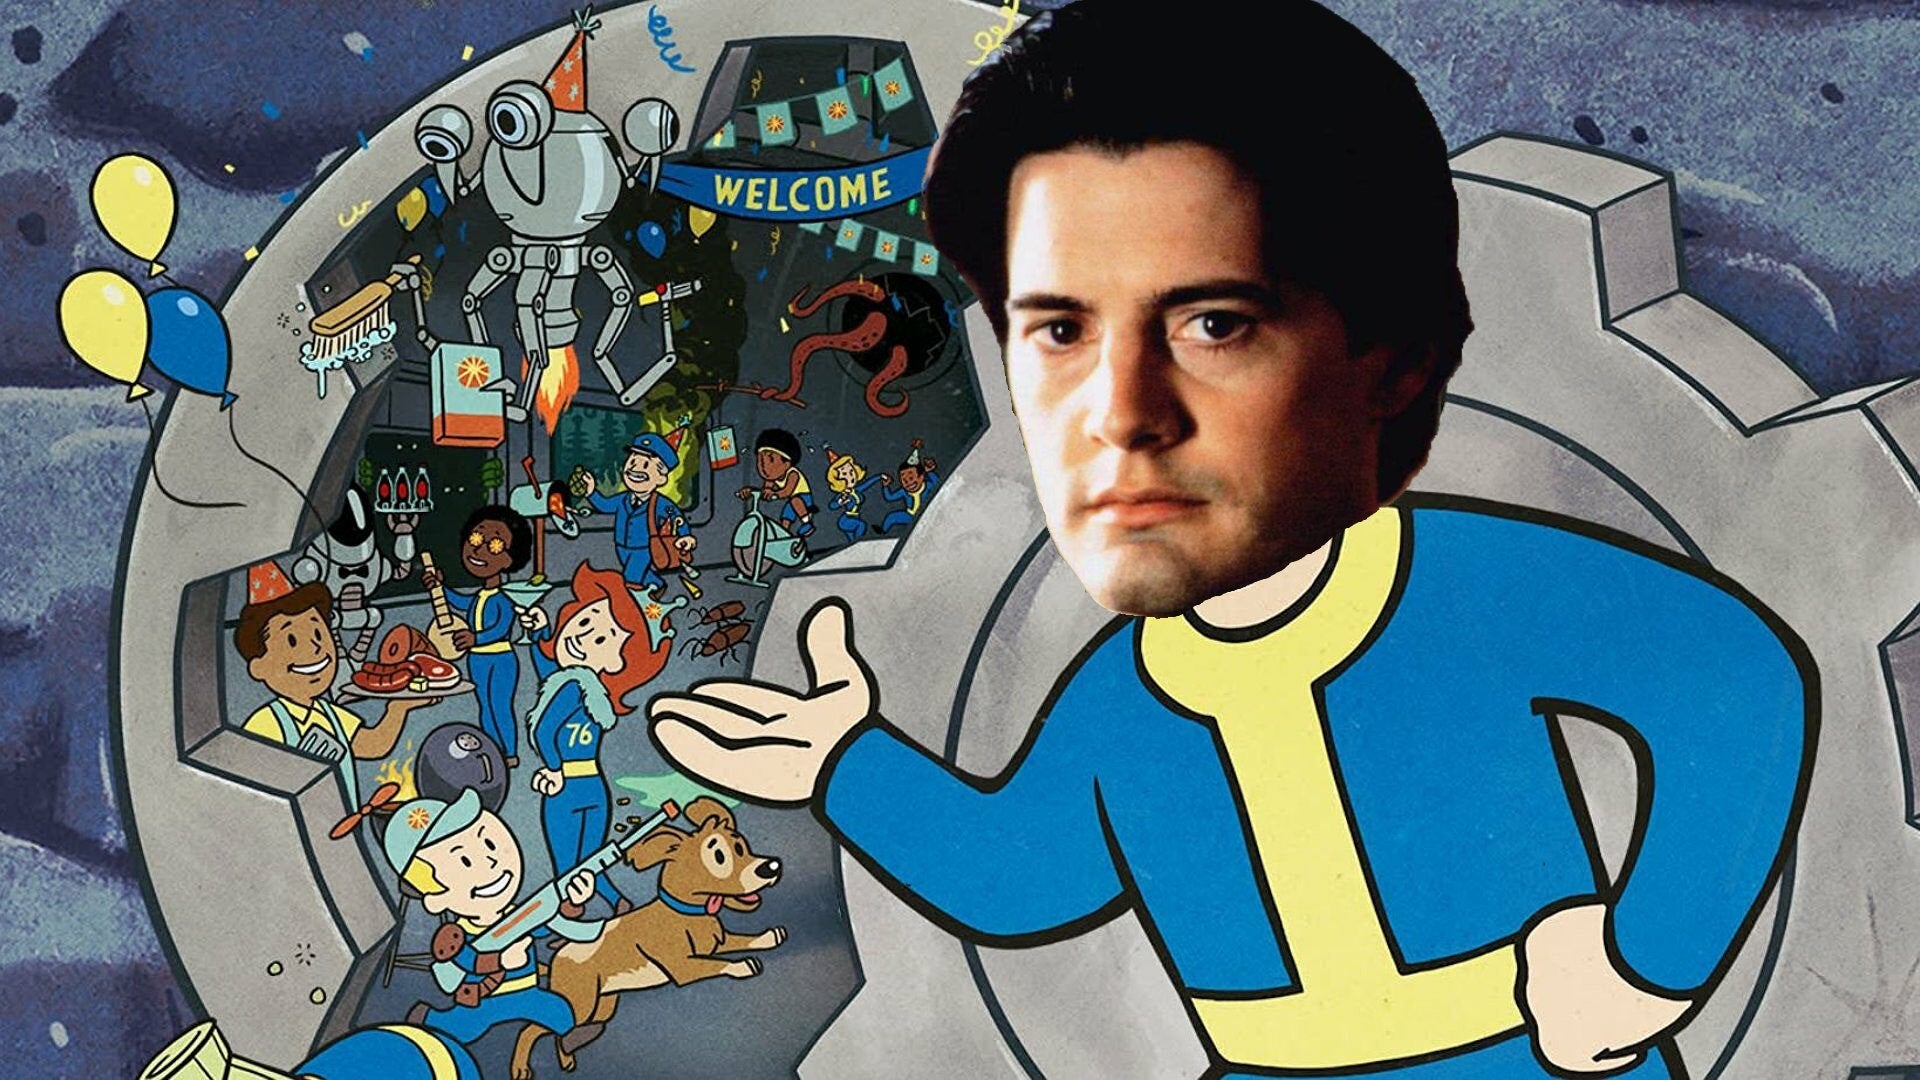 Verteran sci-fi actor Kyle MacLachlan has been cast in an unknown role for the Fallout TV series.